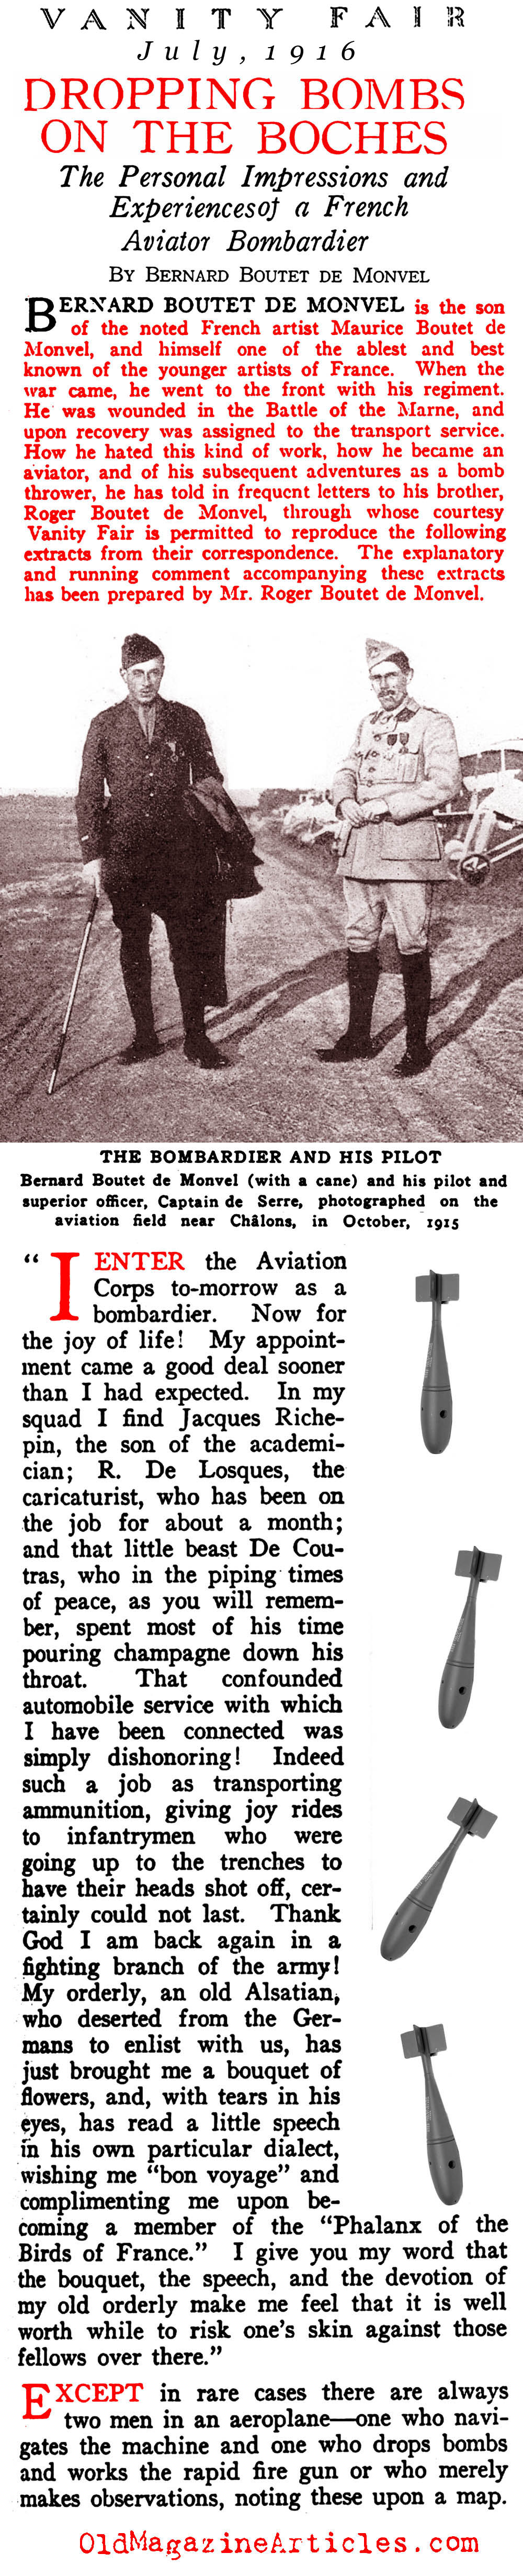 The Experiences of a Bombardier in the Young French Air Corps  (Vanity Fair, 1916)